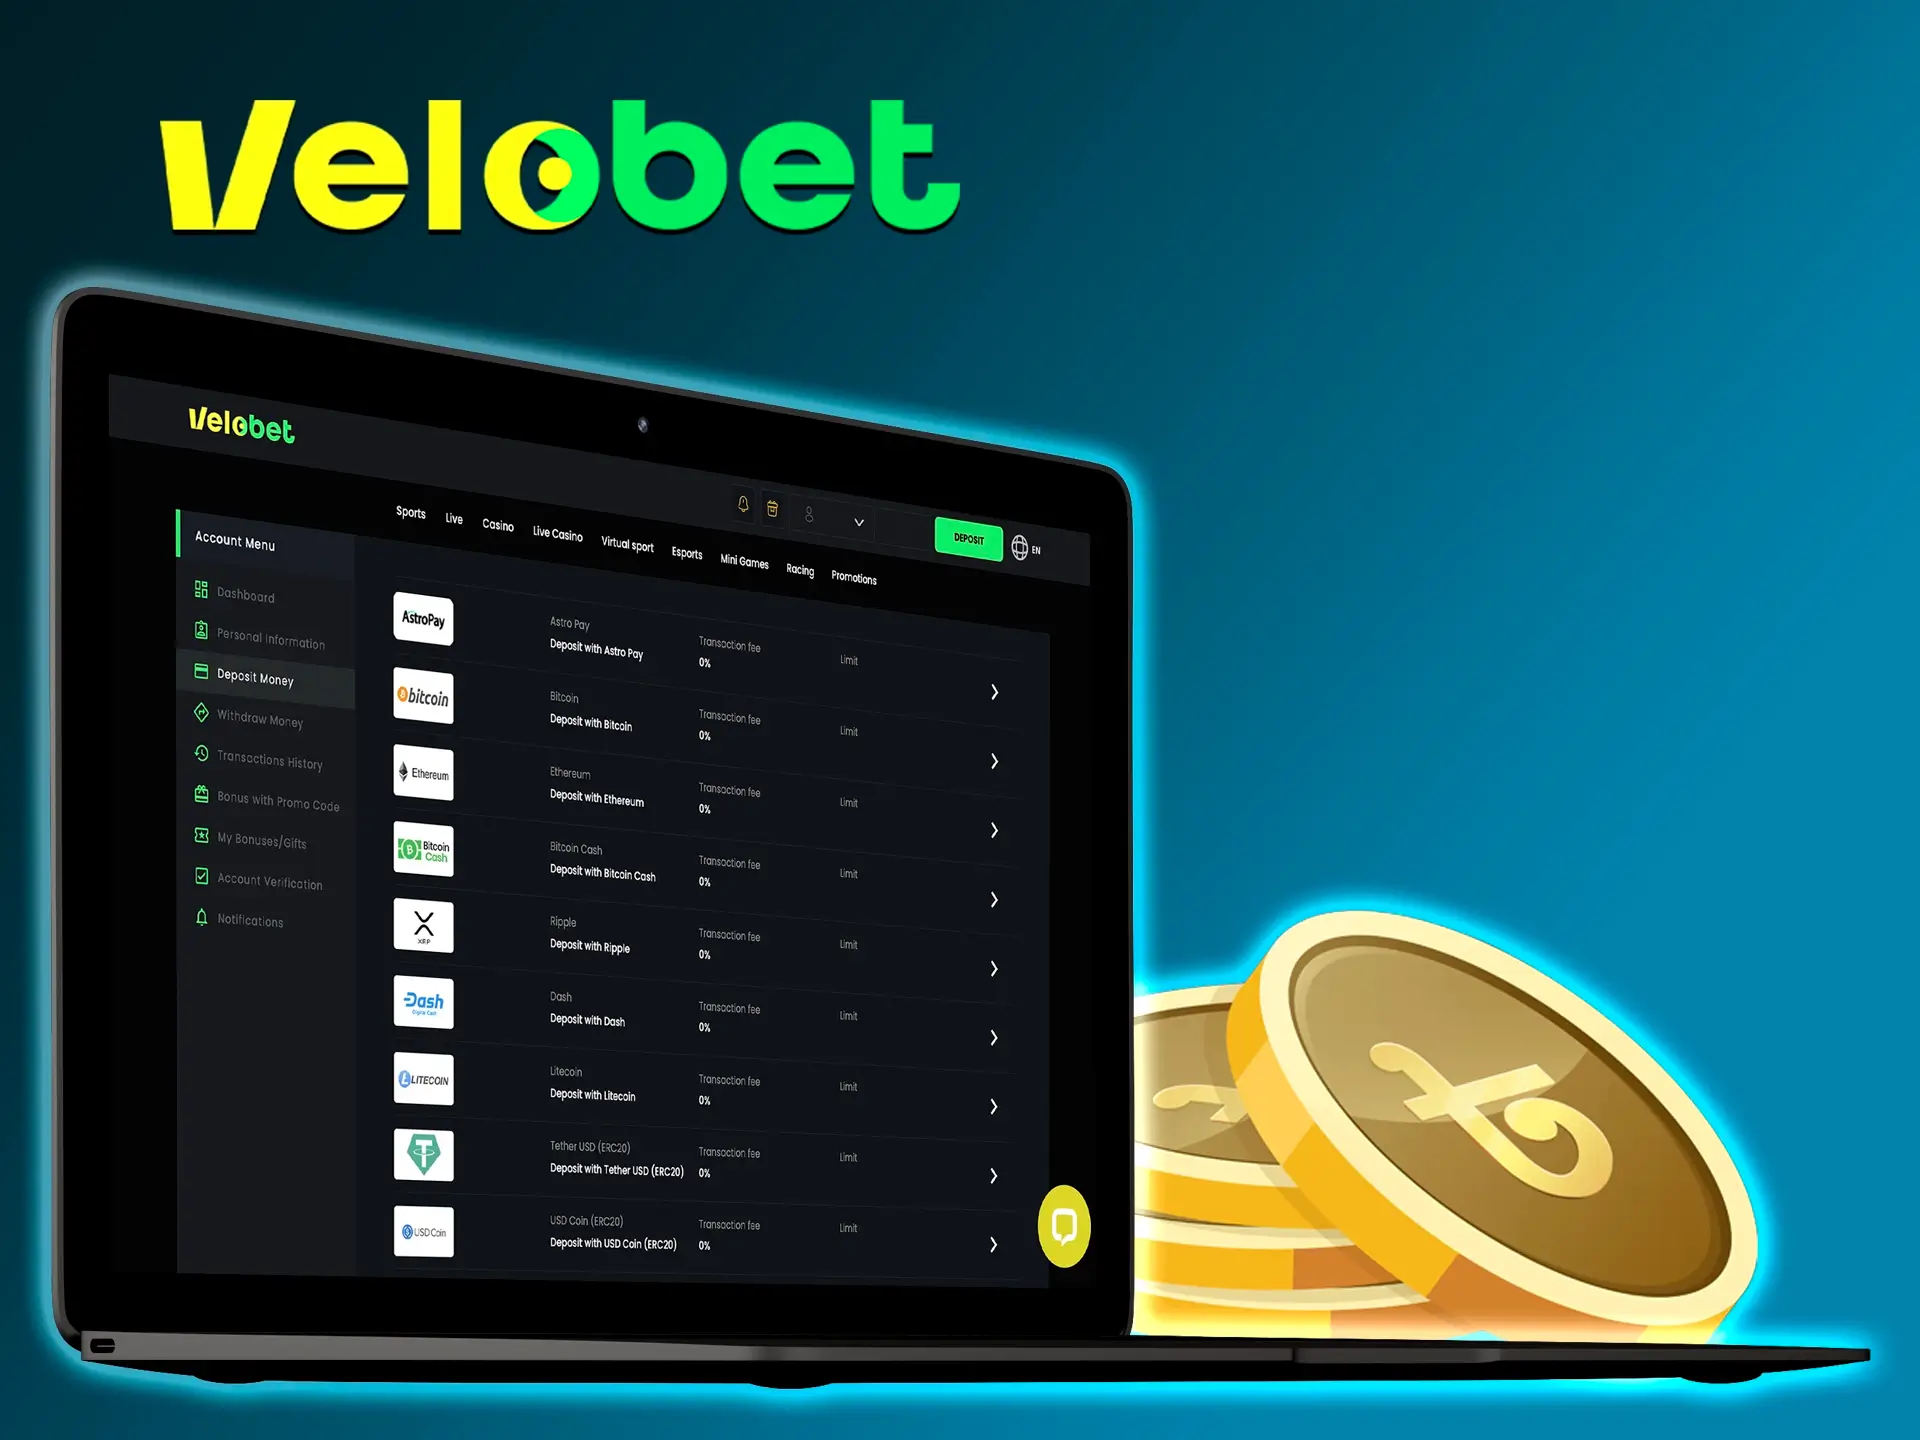 Make your first deposit to start betting and winning at Velobet Casino.